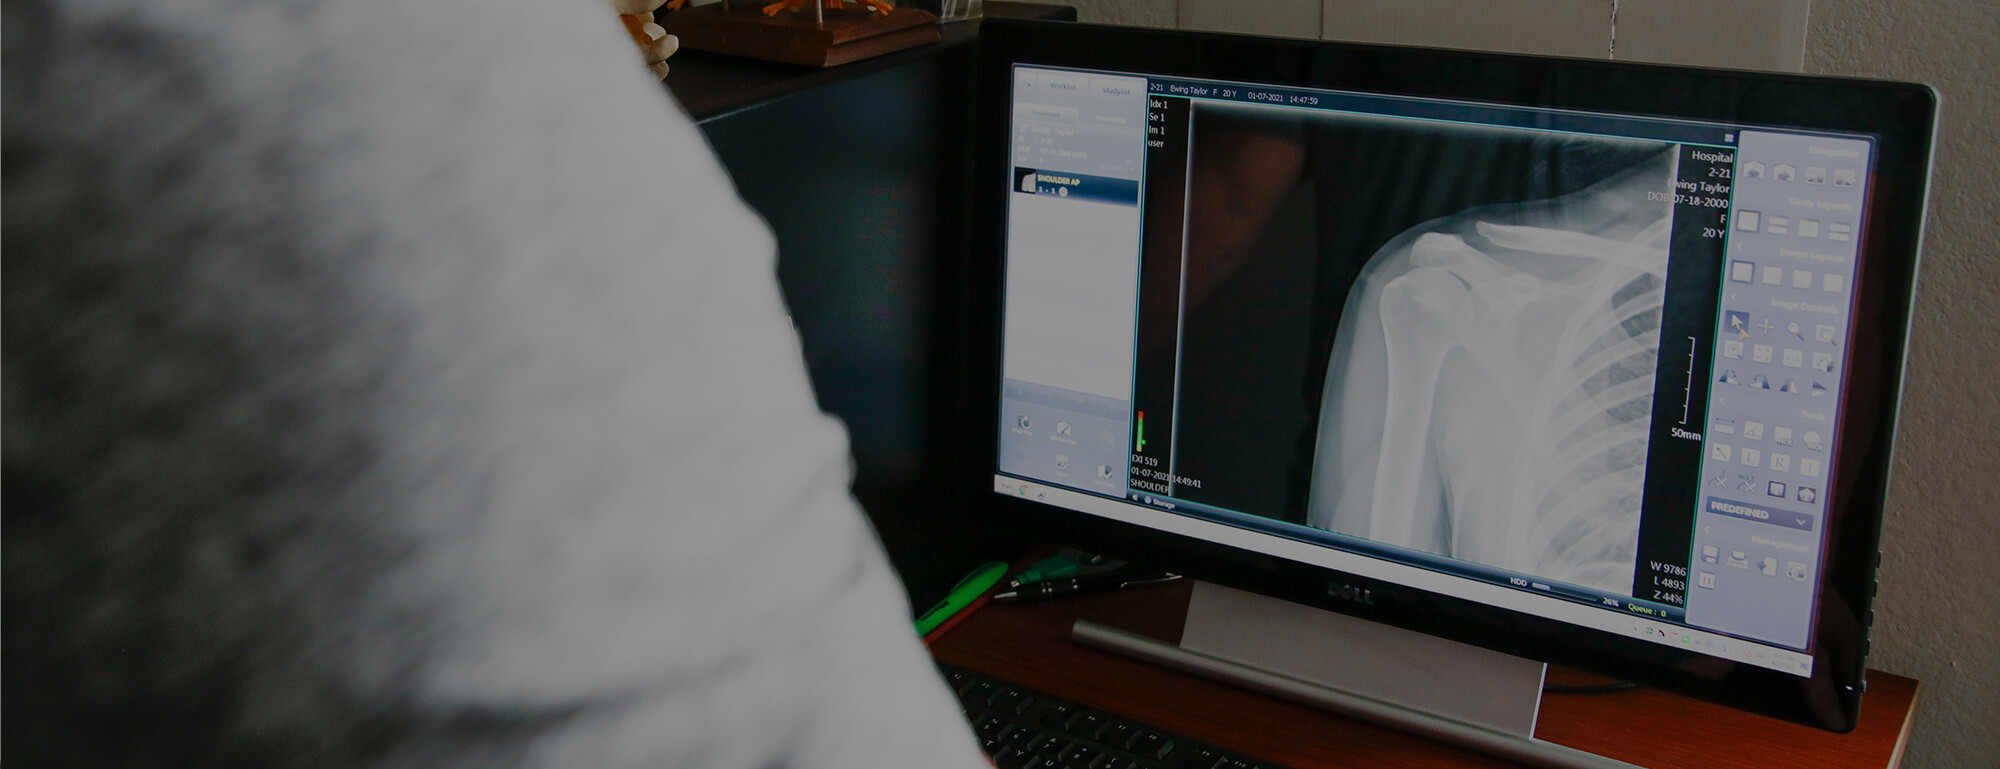 A Day Chiropractic doctor reviews x-ray and imaging for a patient on a desktop screen.